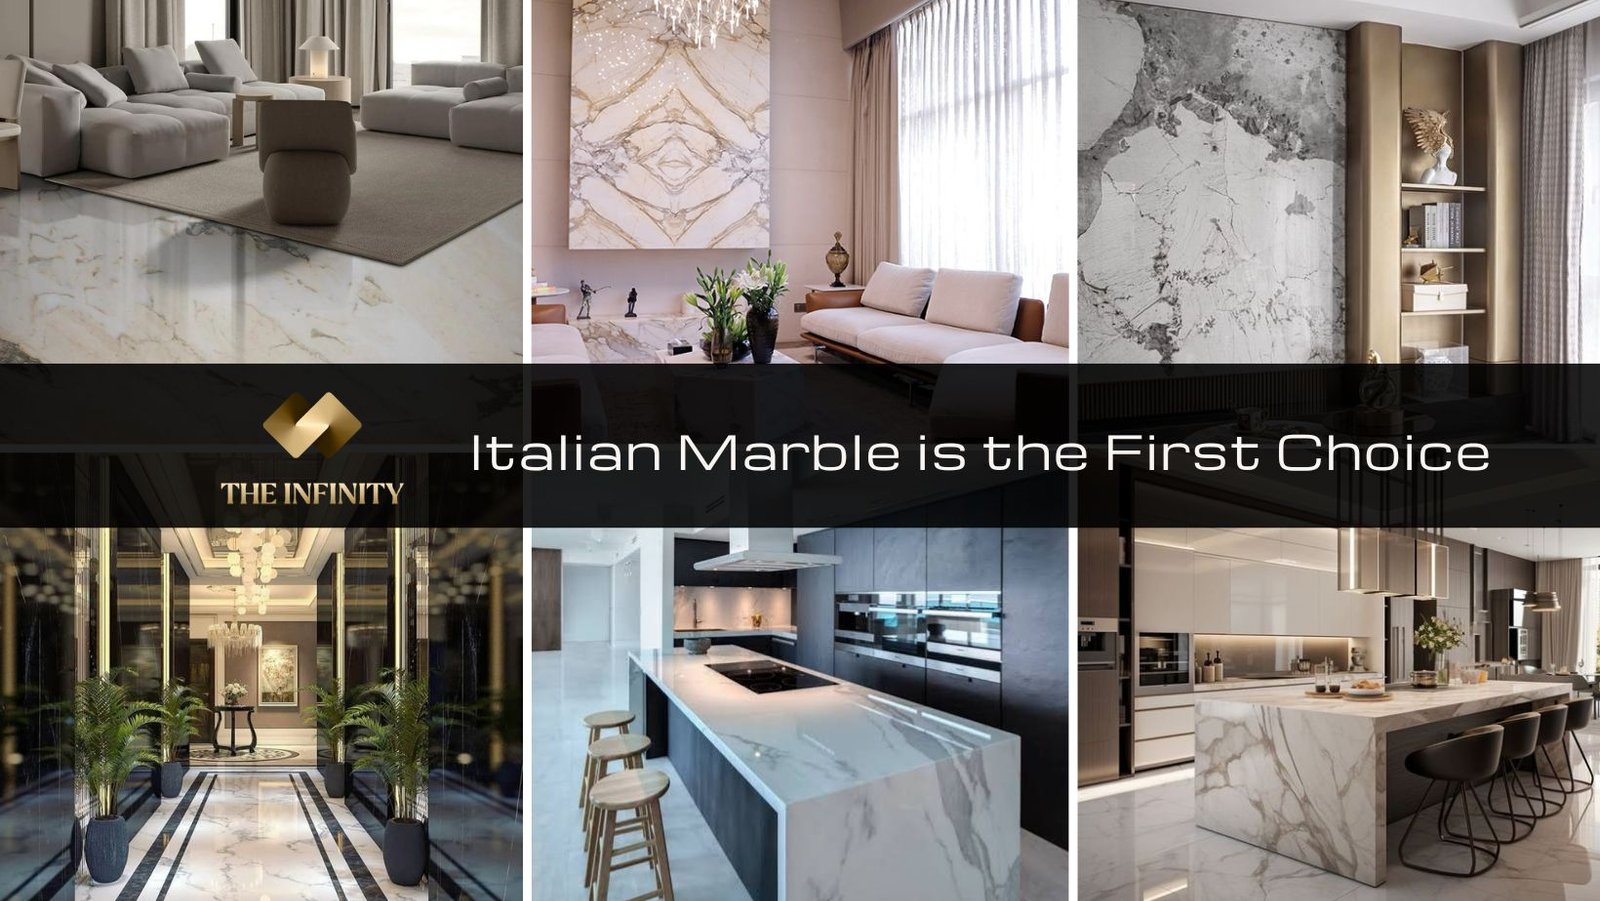 Why Italian Marble is the First Choice